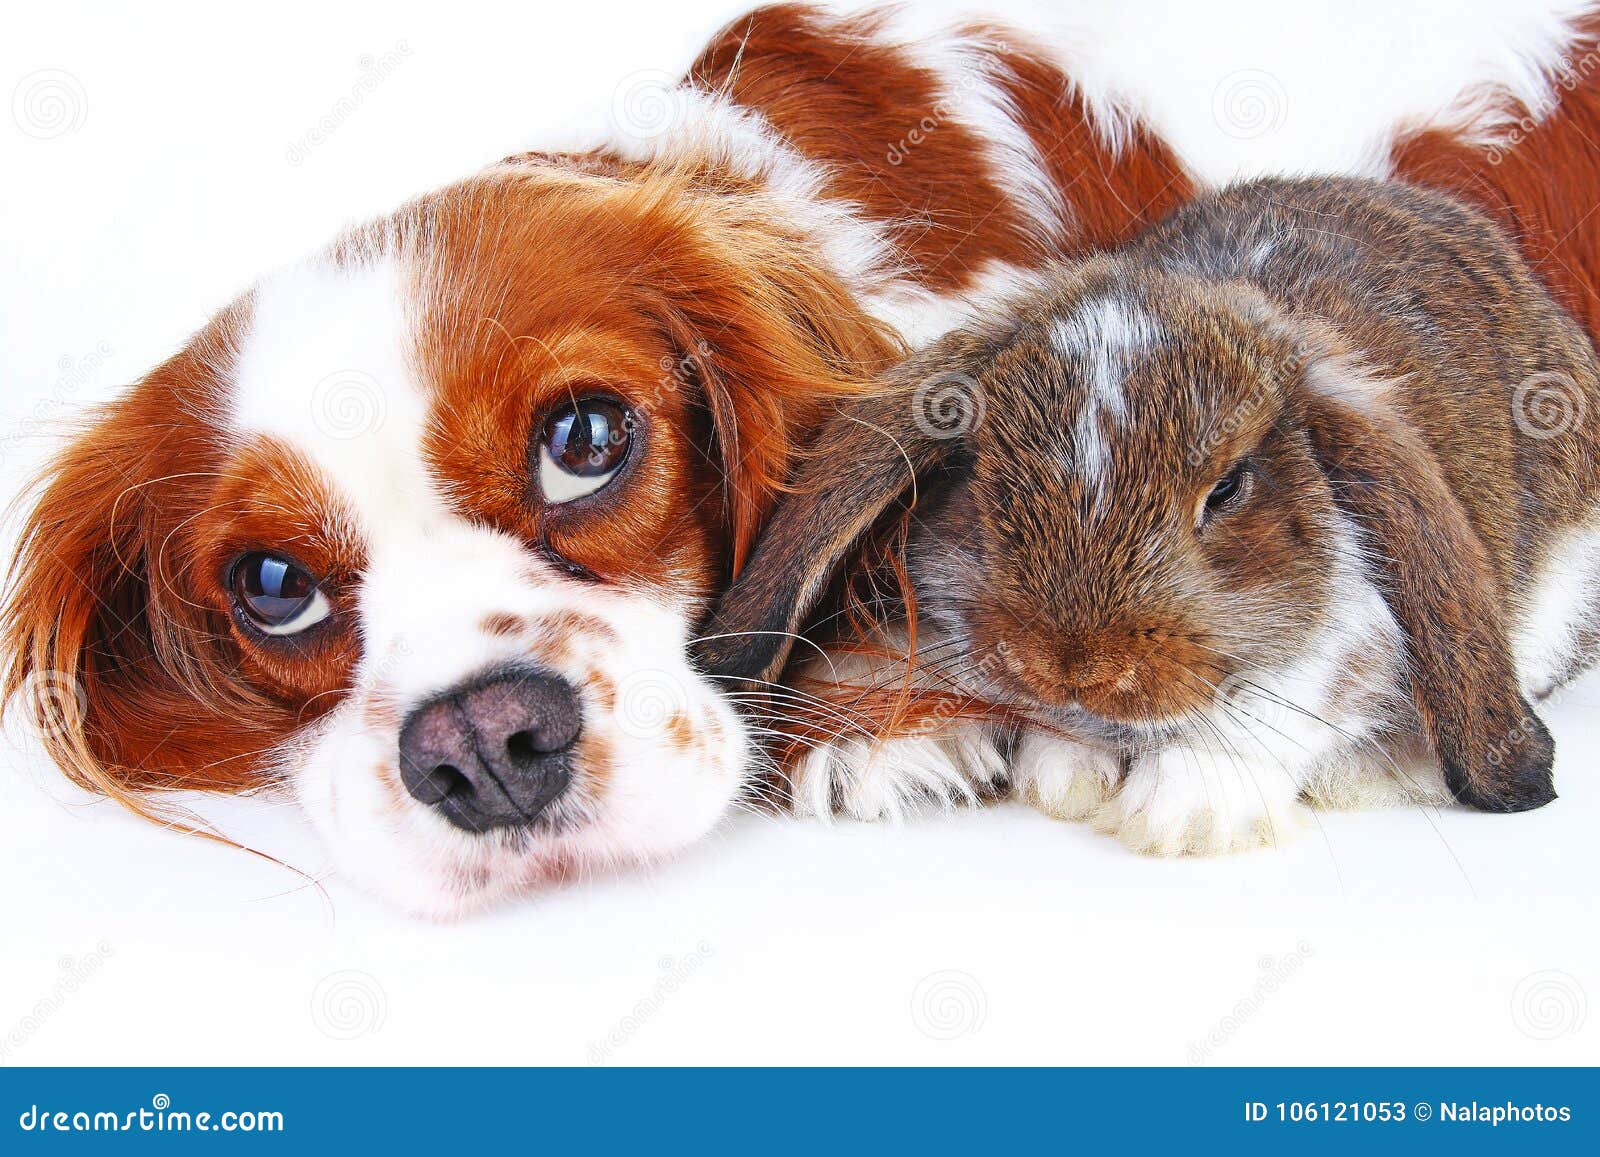 79,317 Animal Friends Stock Photos - Free & Royalty-Free Stock Photos from  Dreamstime